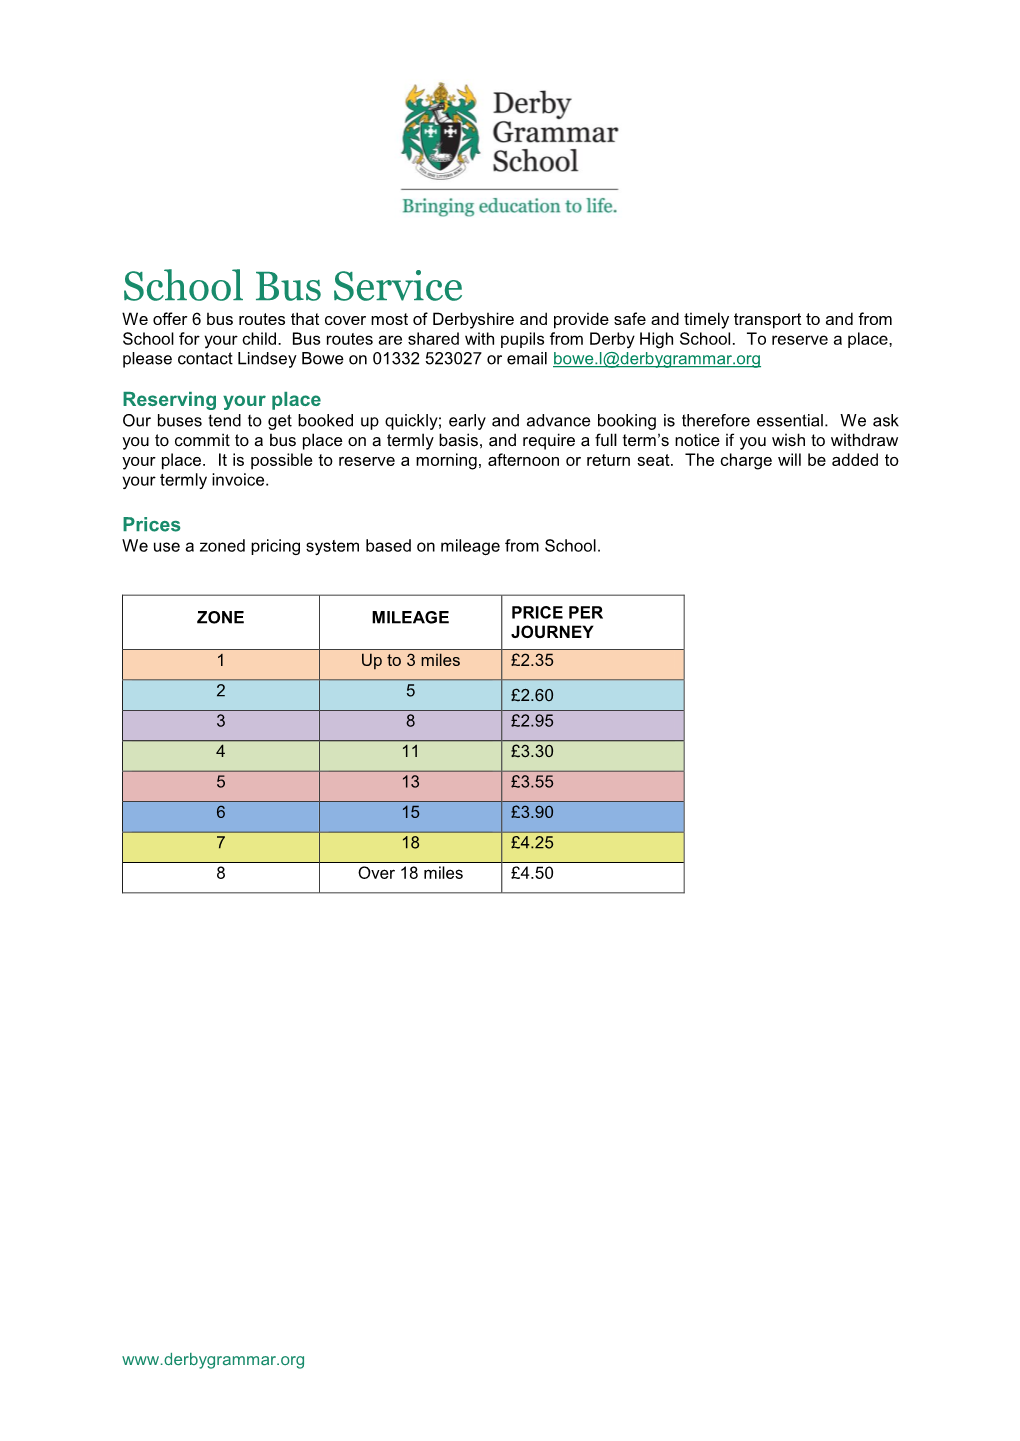 School Bus Service We Offer 6 Bus Routes That Cover Most of Derbyshire and Provide Safe and Timely Transport to and from School for Your Child